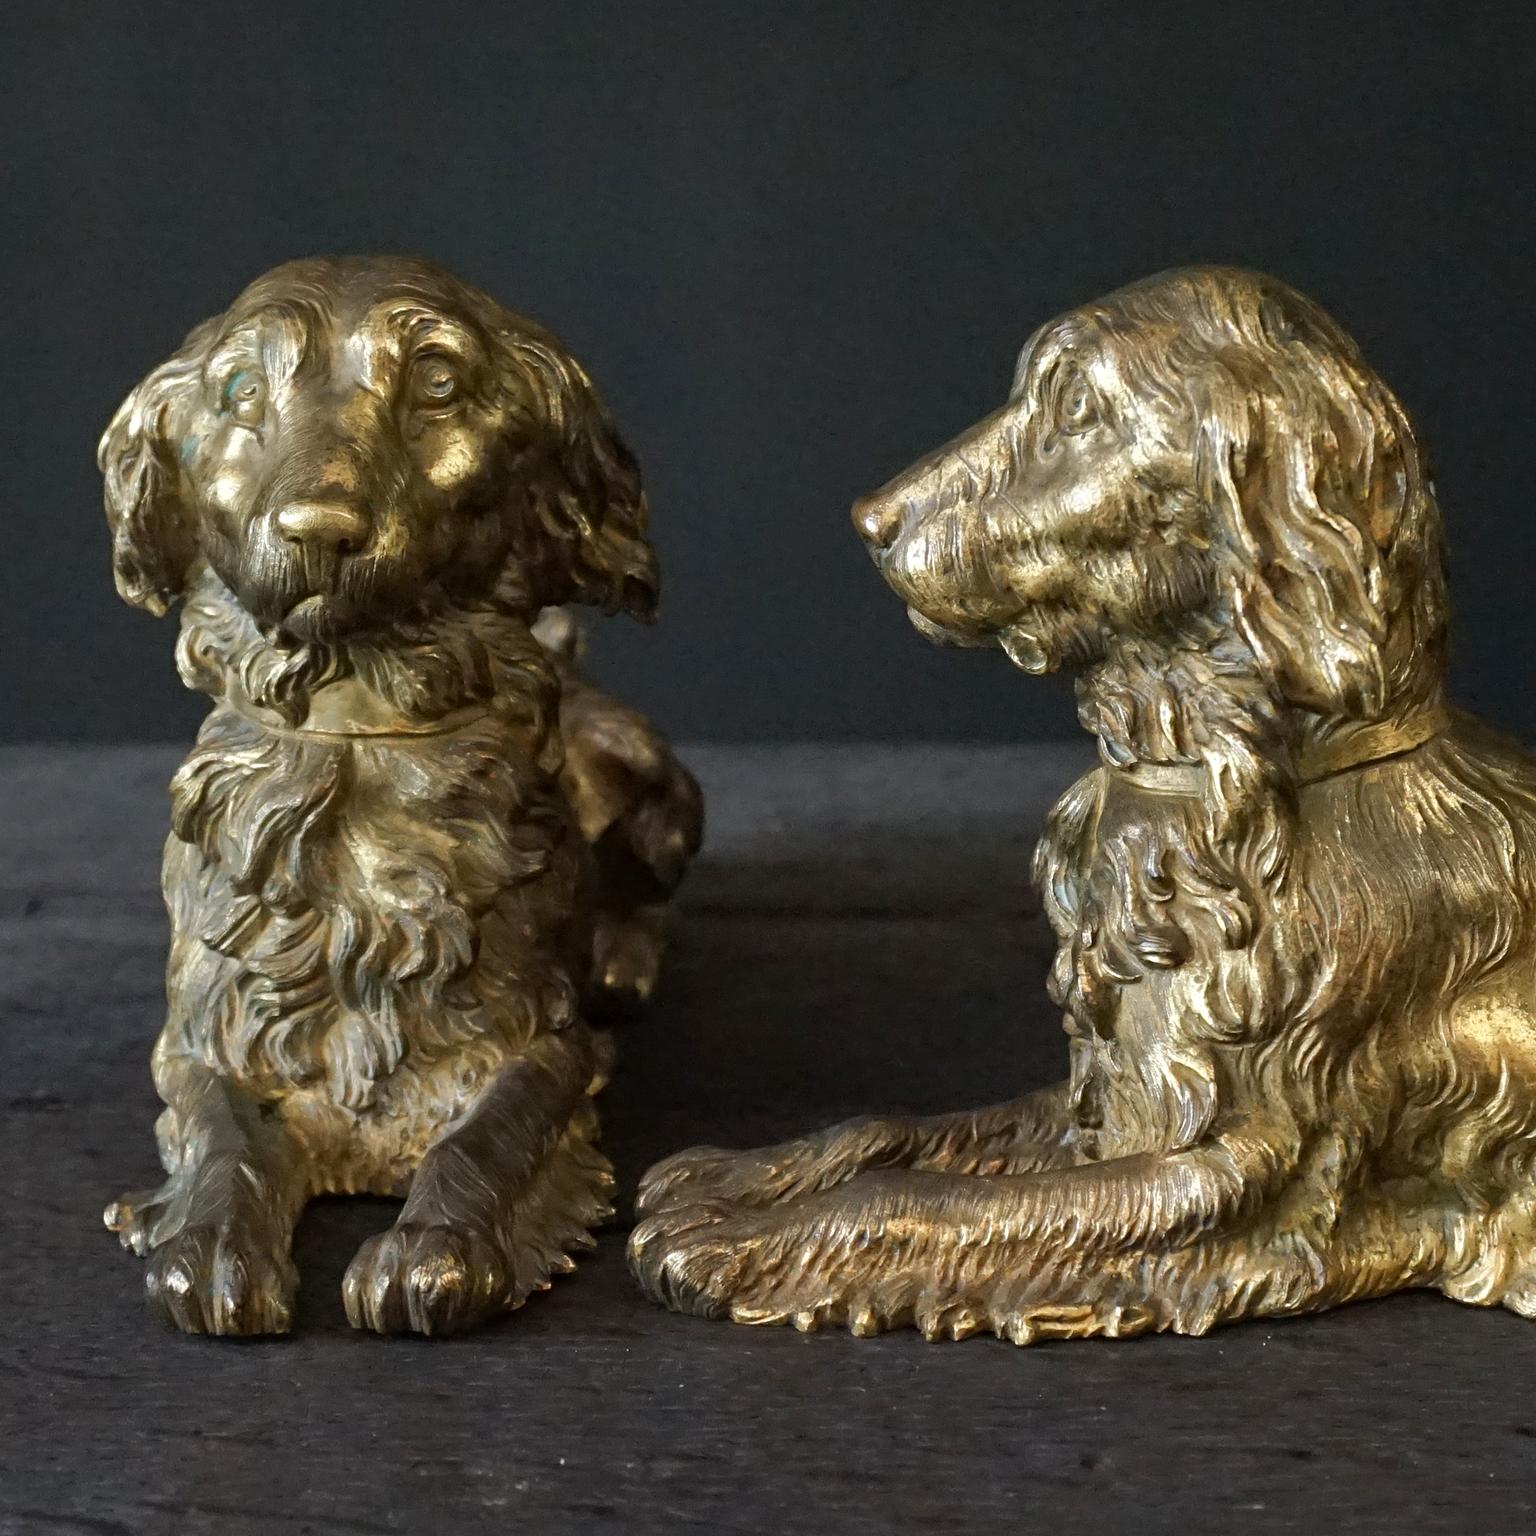 Victorian Two 19th Century English Cast Brass Hunting Dog Fenders Golden Retriever Statues